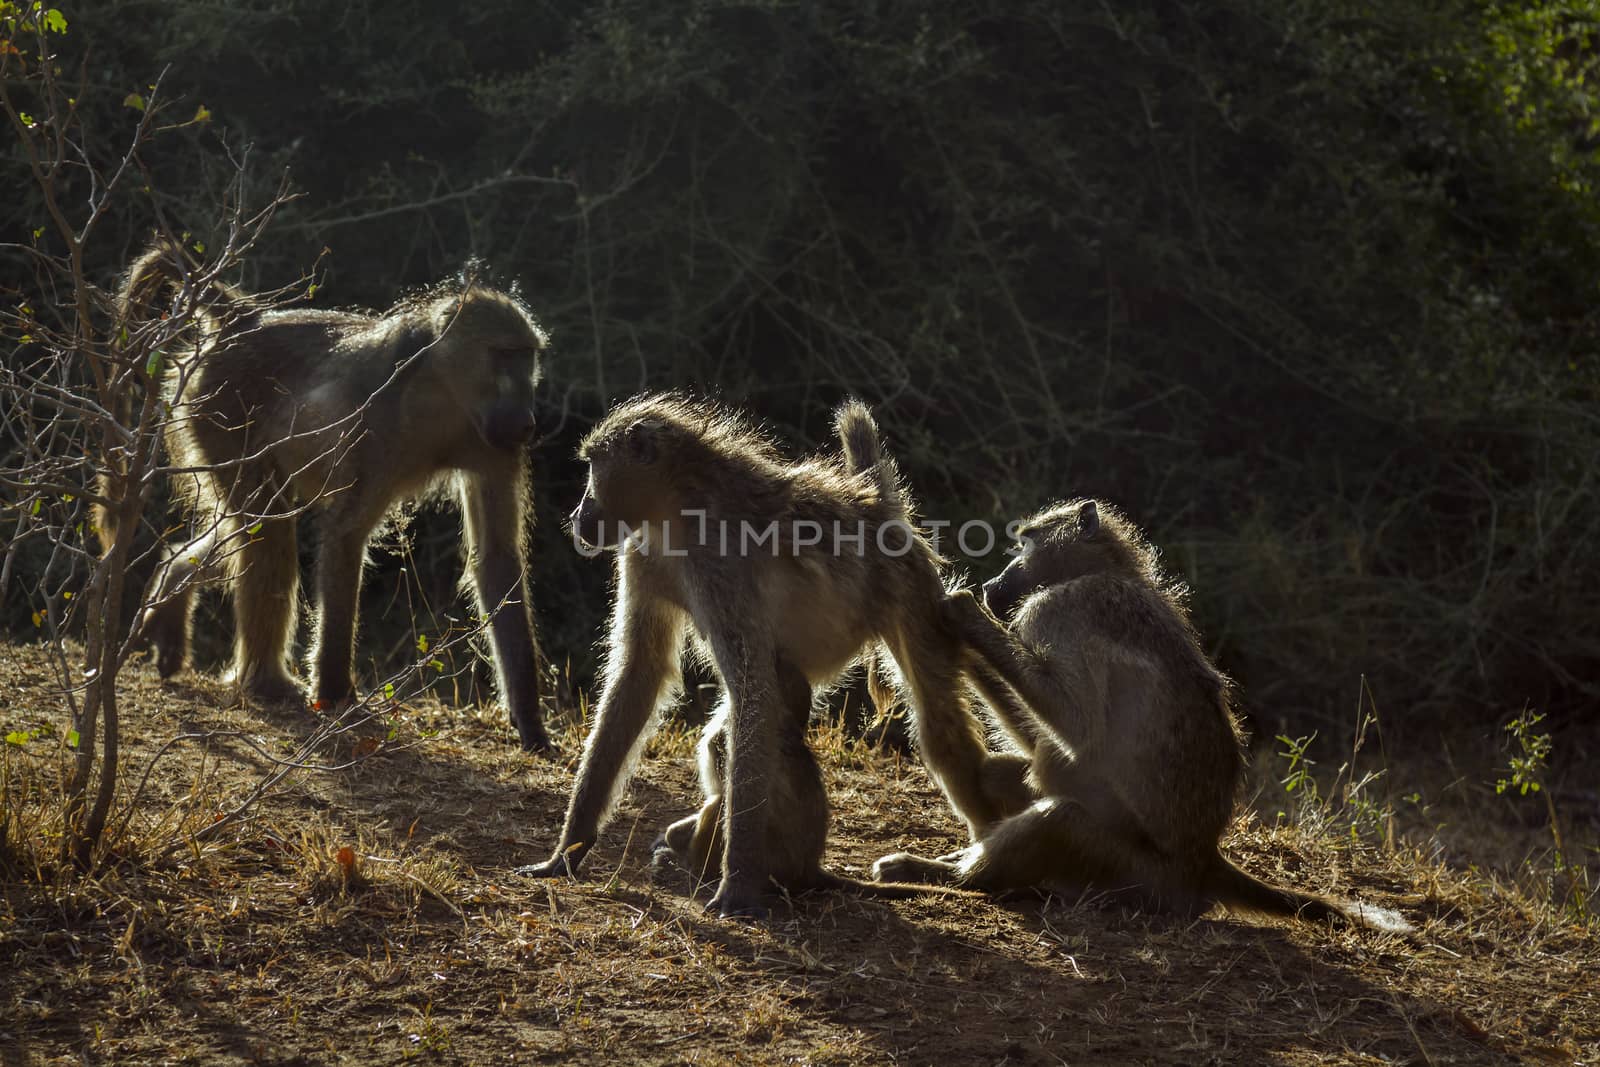 Chacma baboon family portrait in backlit in Kruger National park, South Africa ; Specie Papio ursinus family of Cercopithecidae